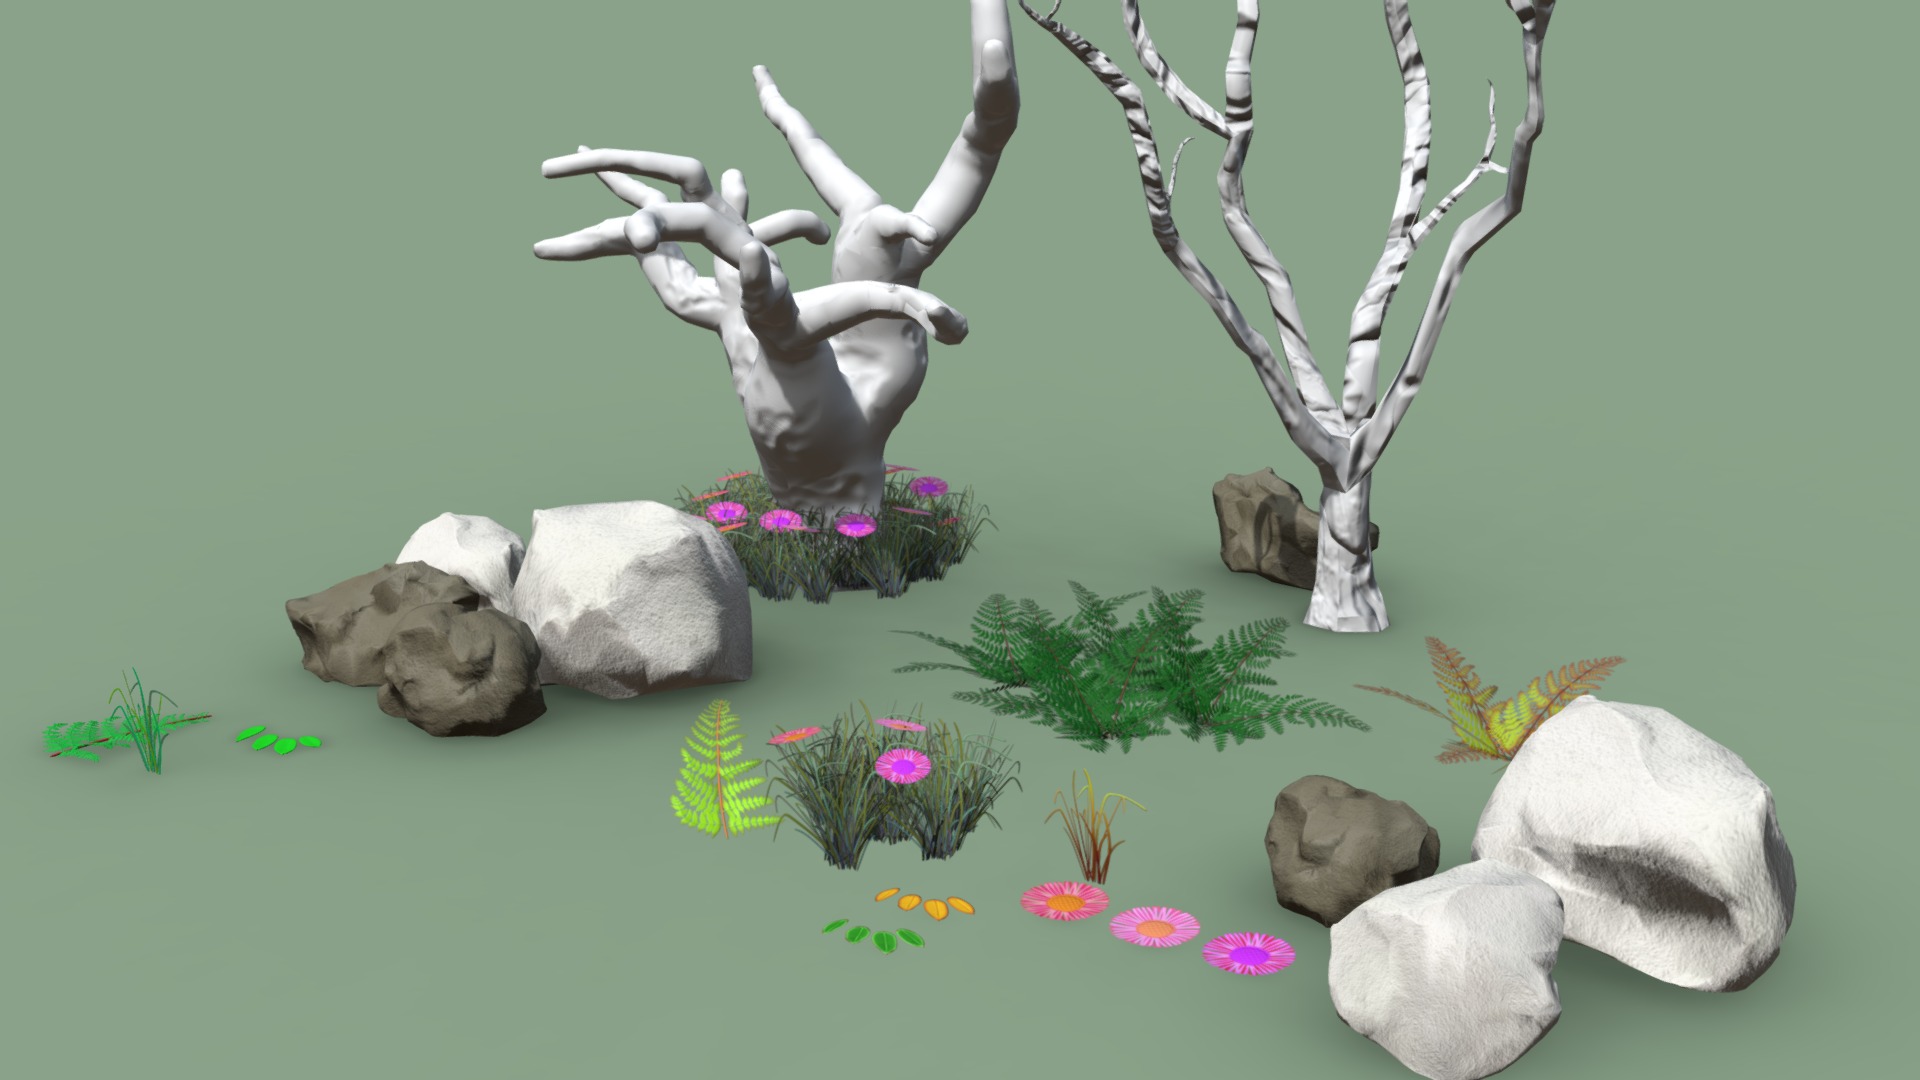 3D model Natural Environment Assets Pack - This is a 3D model of the Natural Environment Assets Pack. The 3D model is about a tree with a skeleton and flowers.